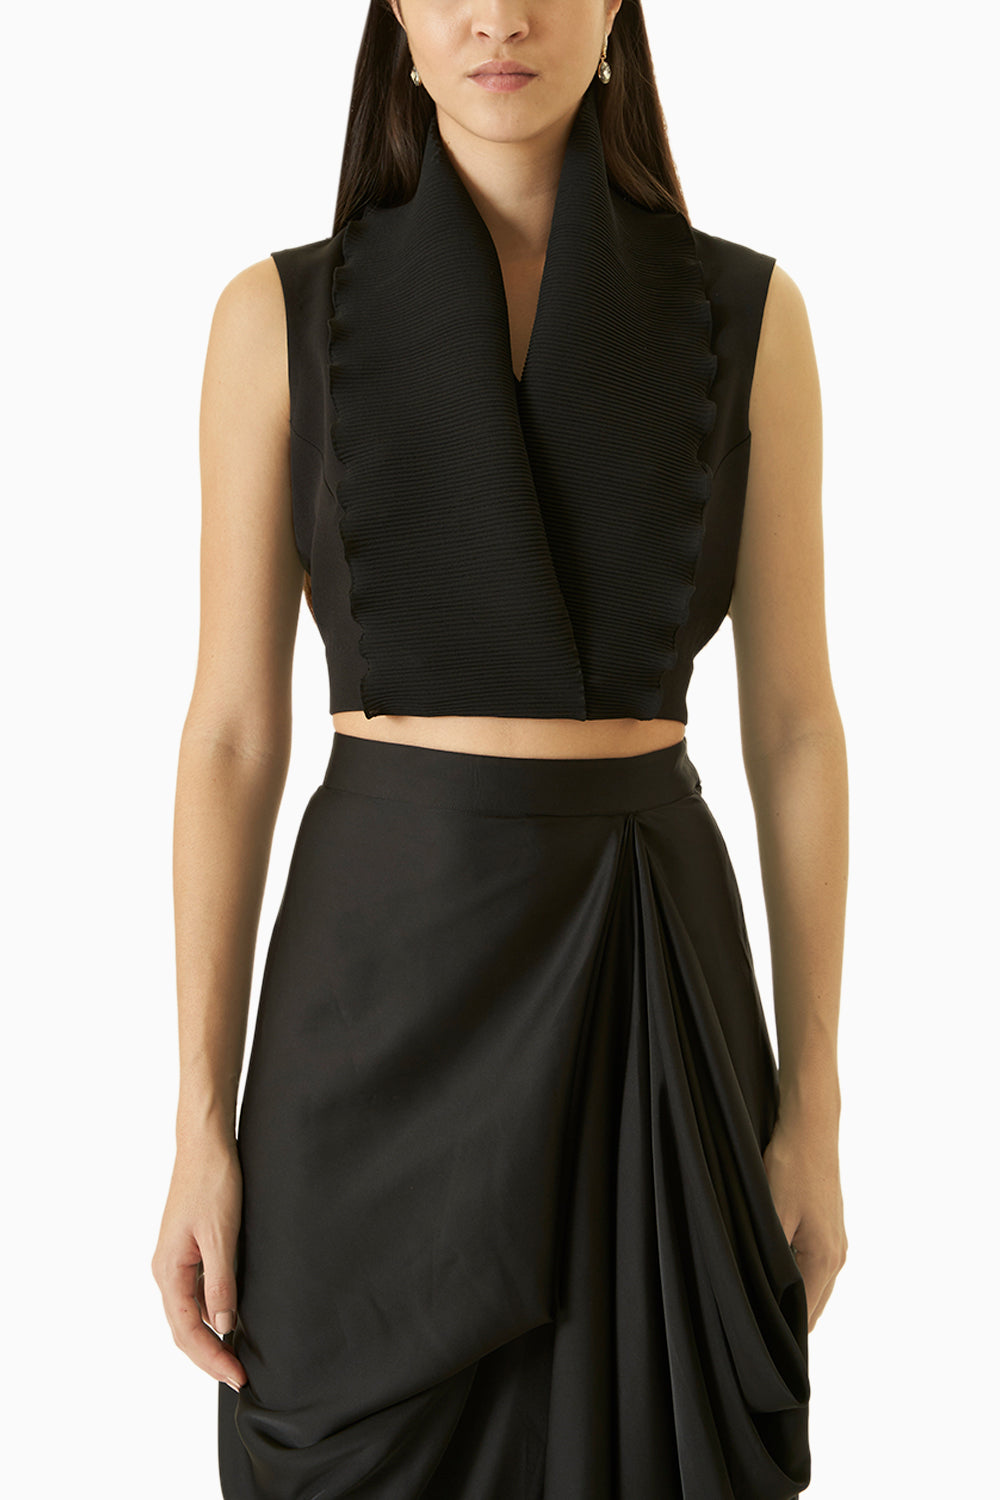 Black Top with Skirt Co-ord Set